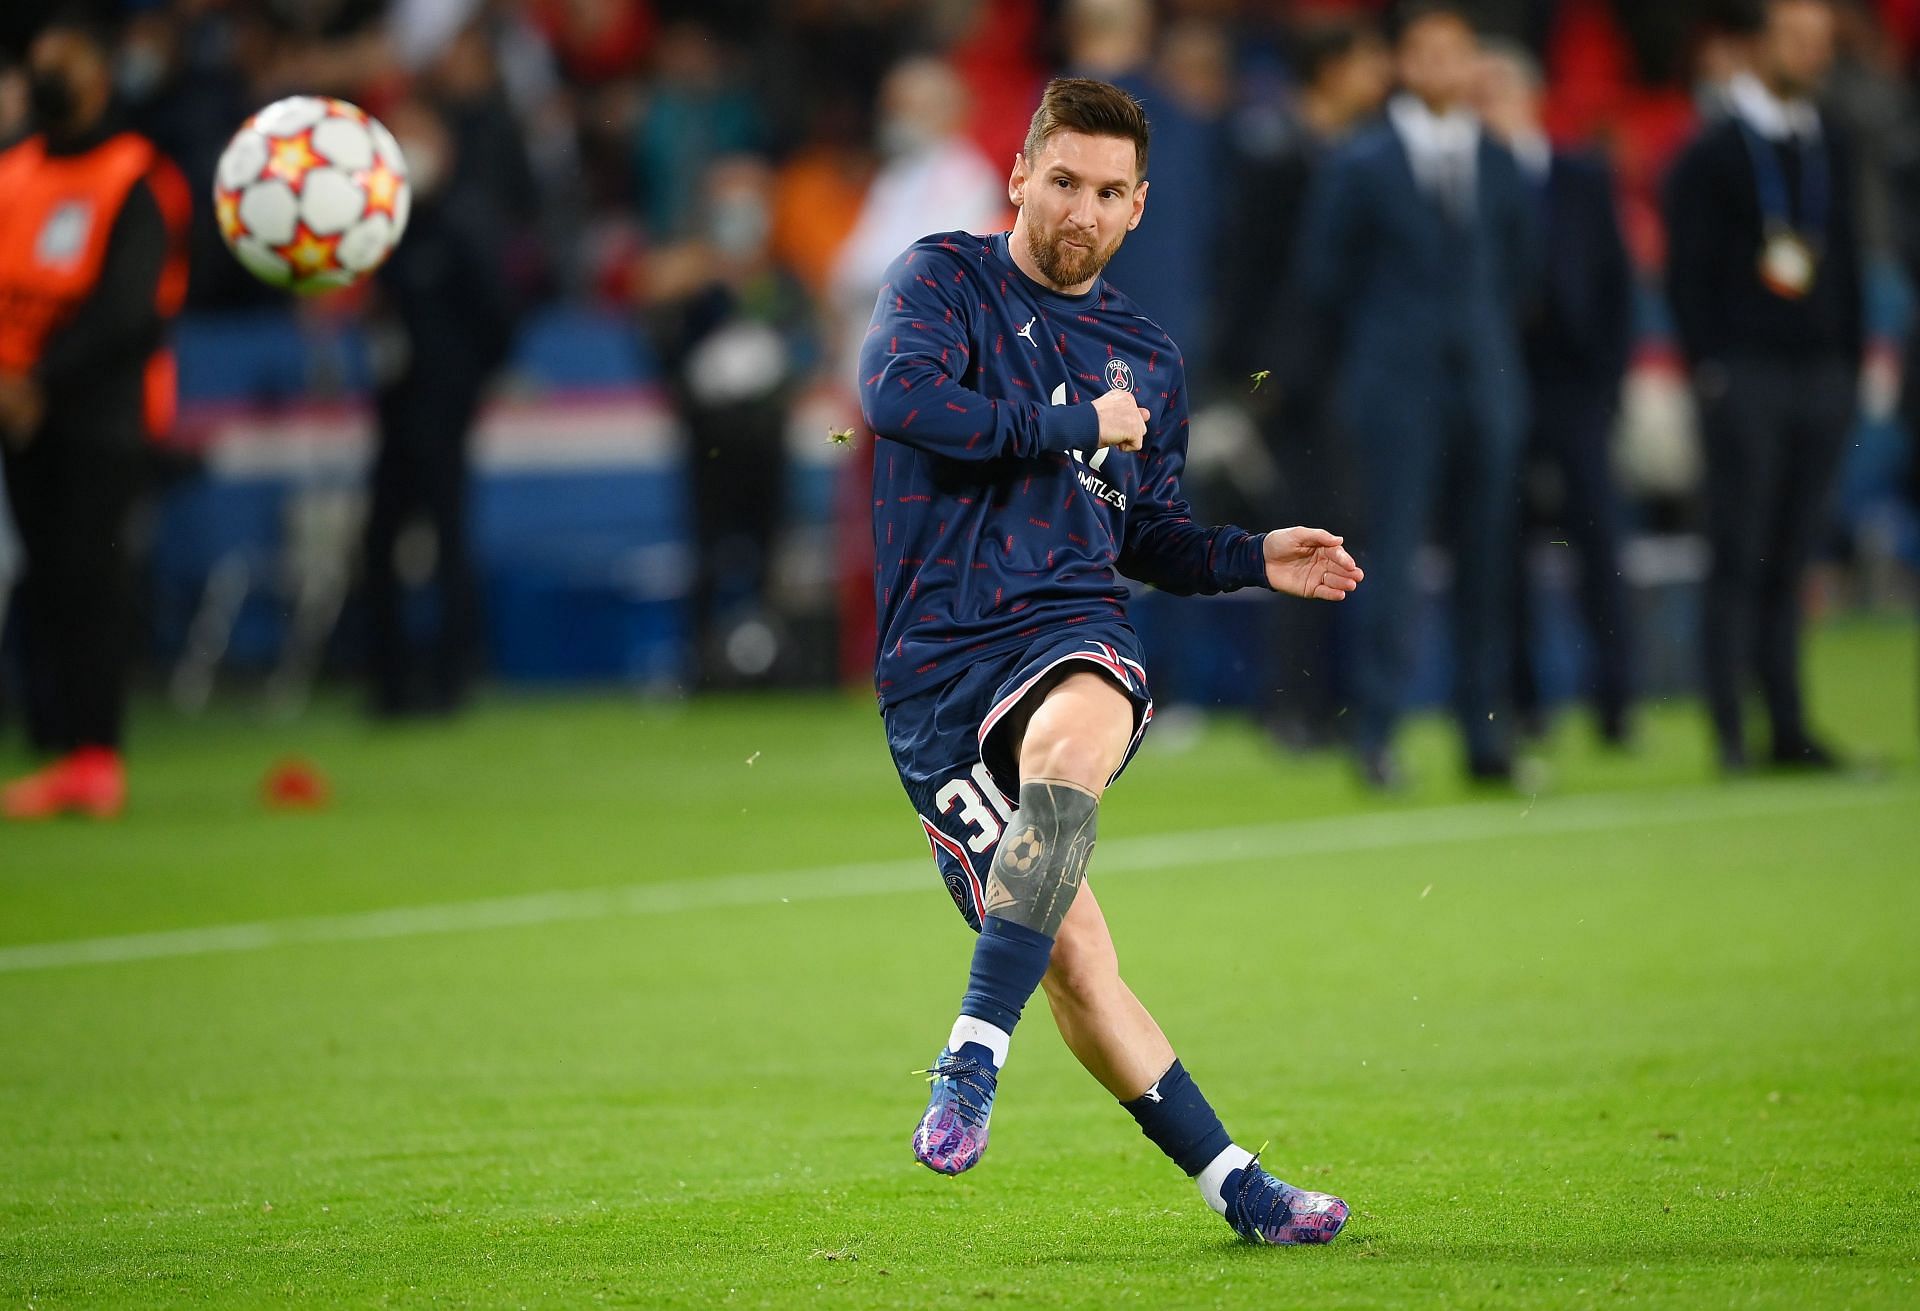 PSG forward Lionel Messi. (Photo by Matthias Hangst/Getty Images)